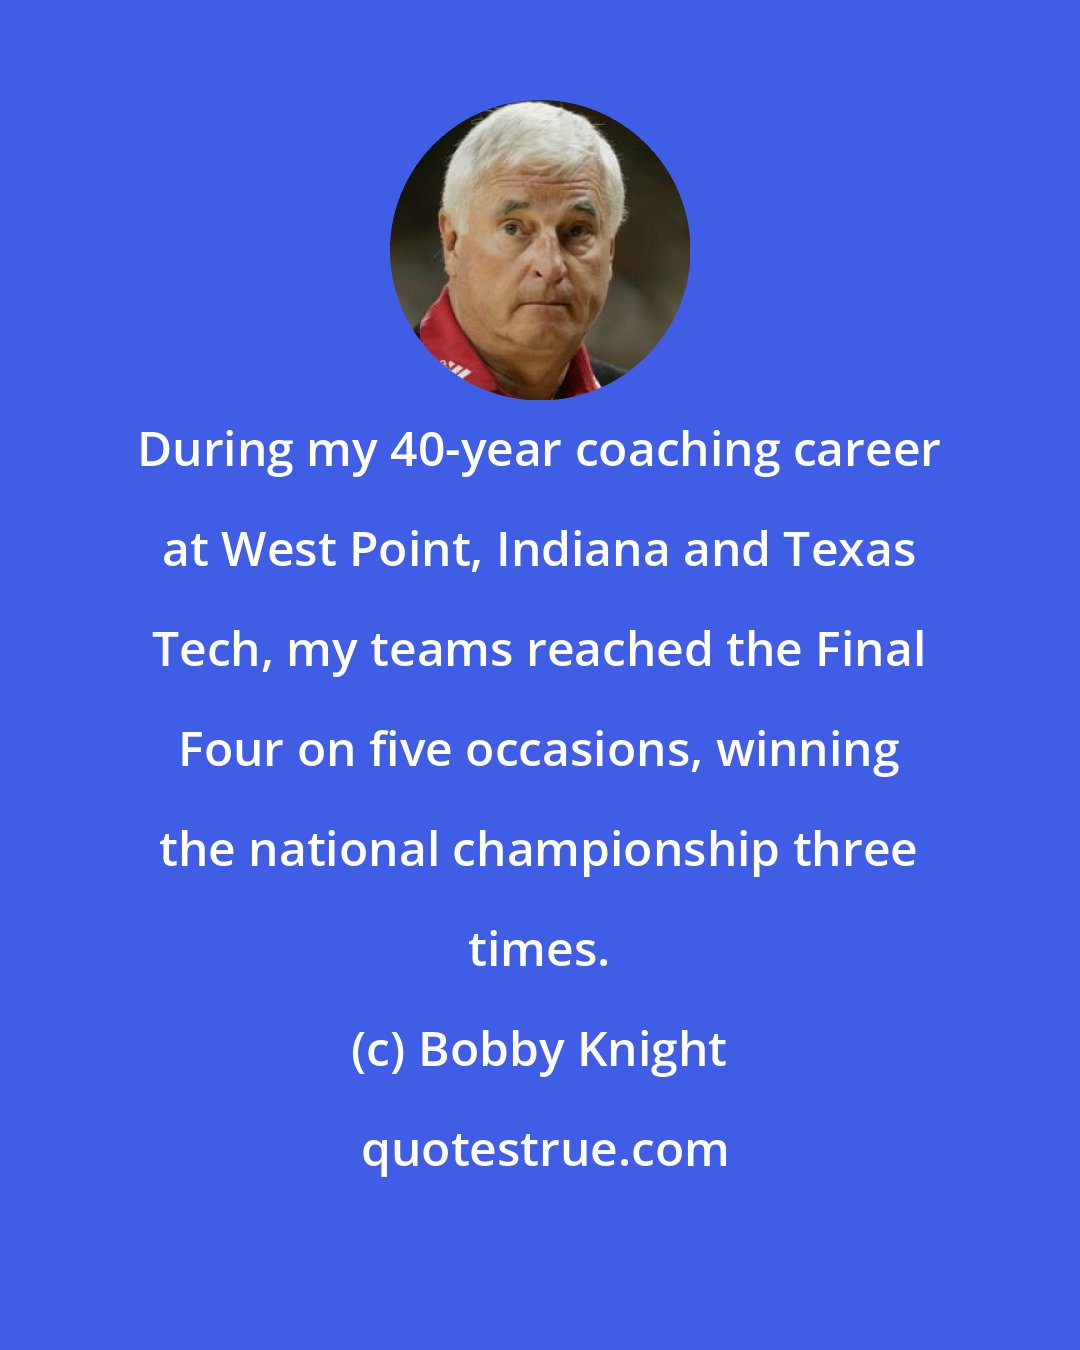 Bobby Knight: During my 40-year coaching career at West Point, Indiana and Texas Tech, my teams reached the Final Four on five occasions, winning the national championship three times.